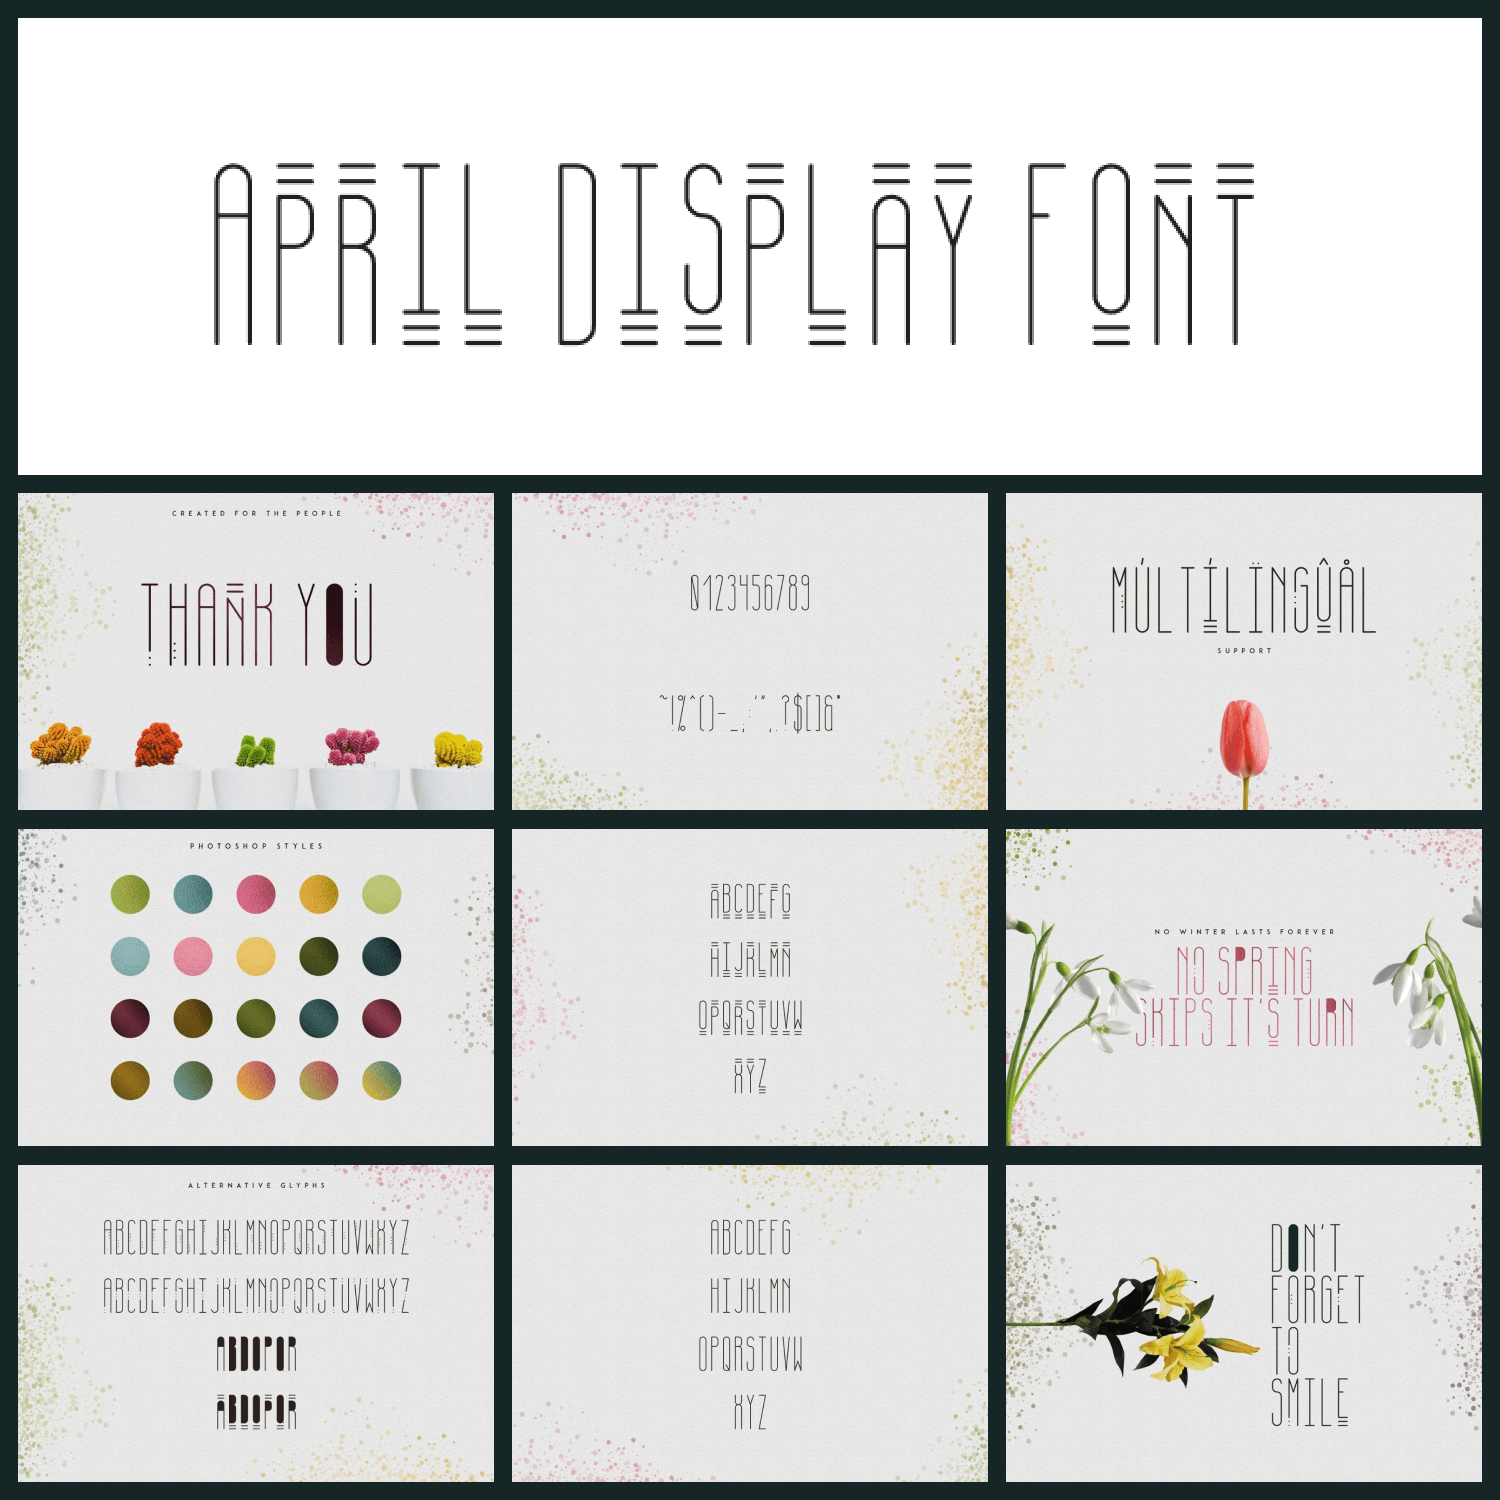 [SPRING VIBES] APRIL DISPLAY FONT cover image.